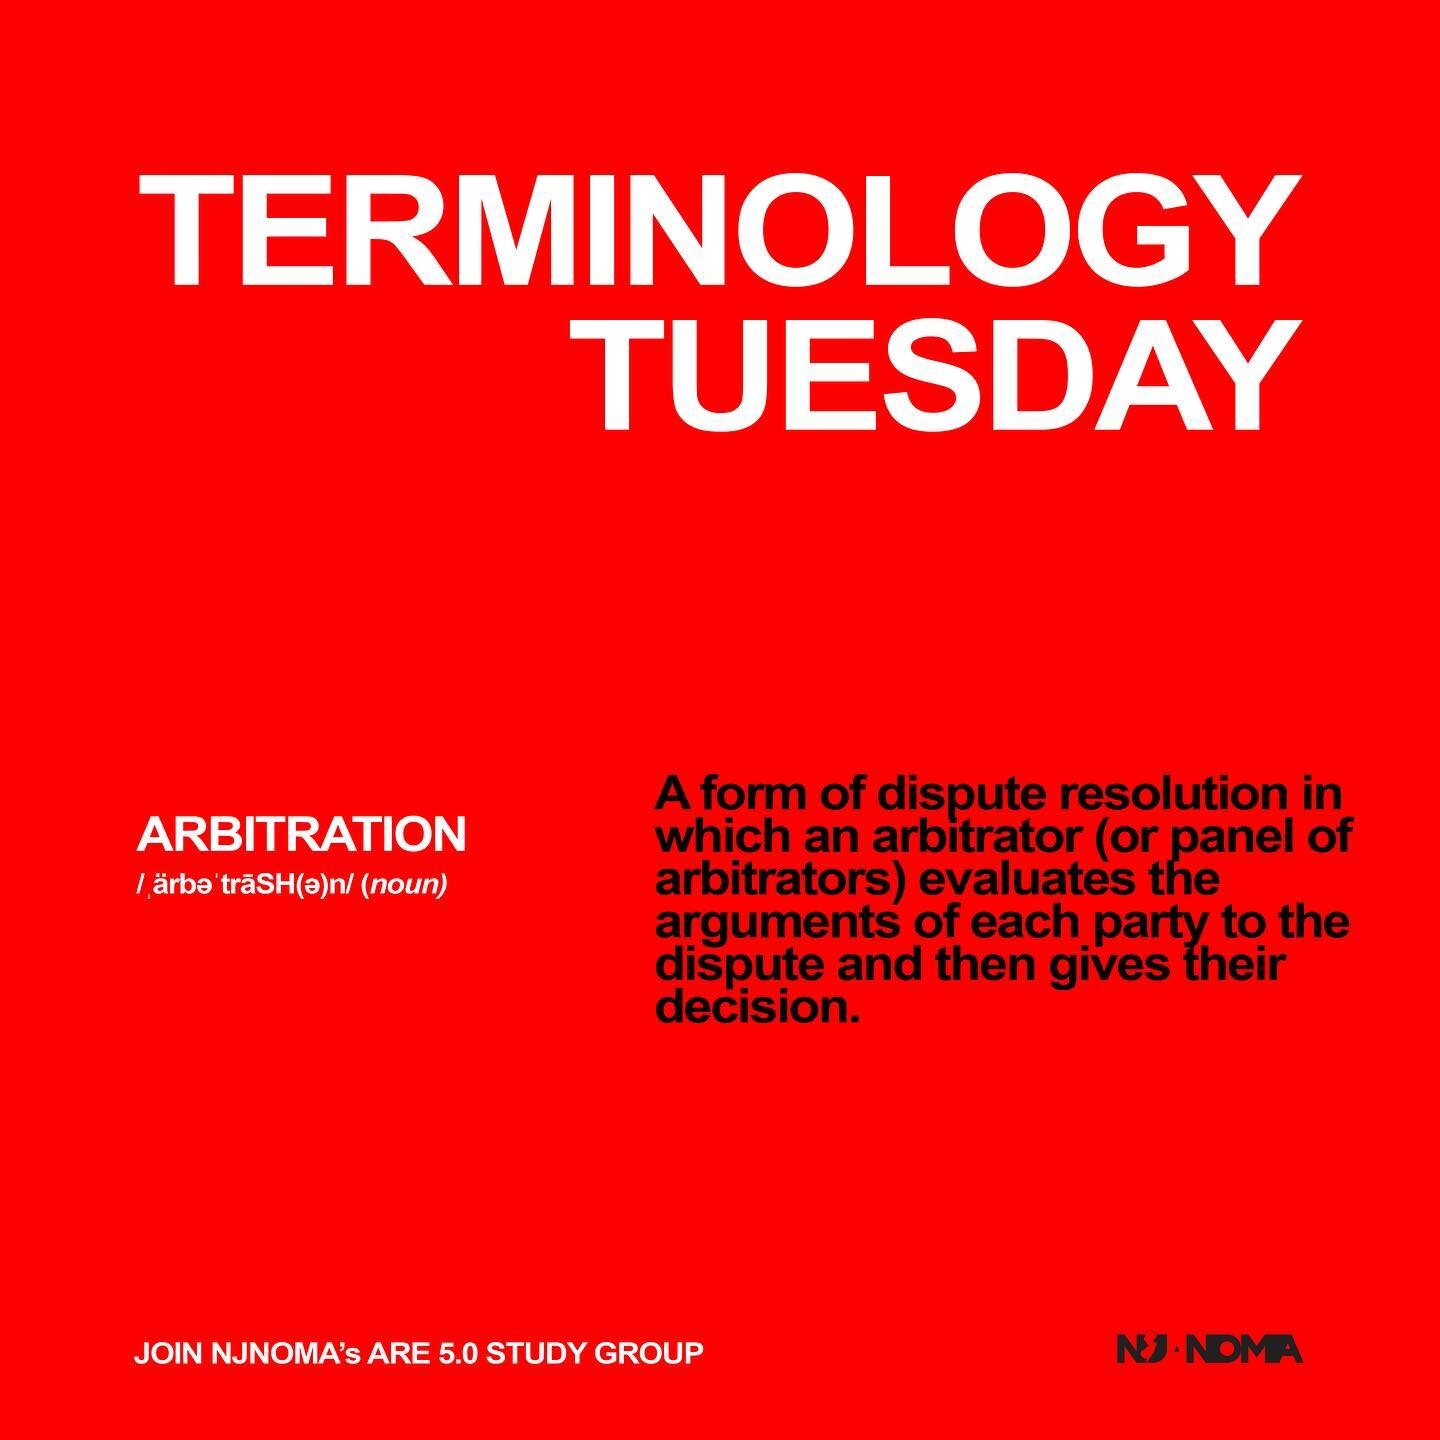 Today&rsquo;s term: ARBITRATION. Join our ARE 5.0 study group... Join NJNOMA. For more information check out website, DM us or email us at newjeryseynoma@gmail.com #NOMA #NJNOMA #NewJerseyNOMA #ARE5 #BlackArchitrect #newjerseyarchitects #architecture